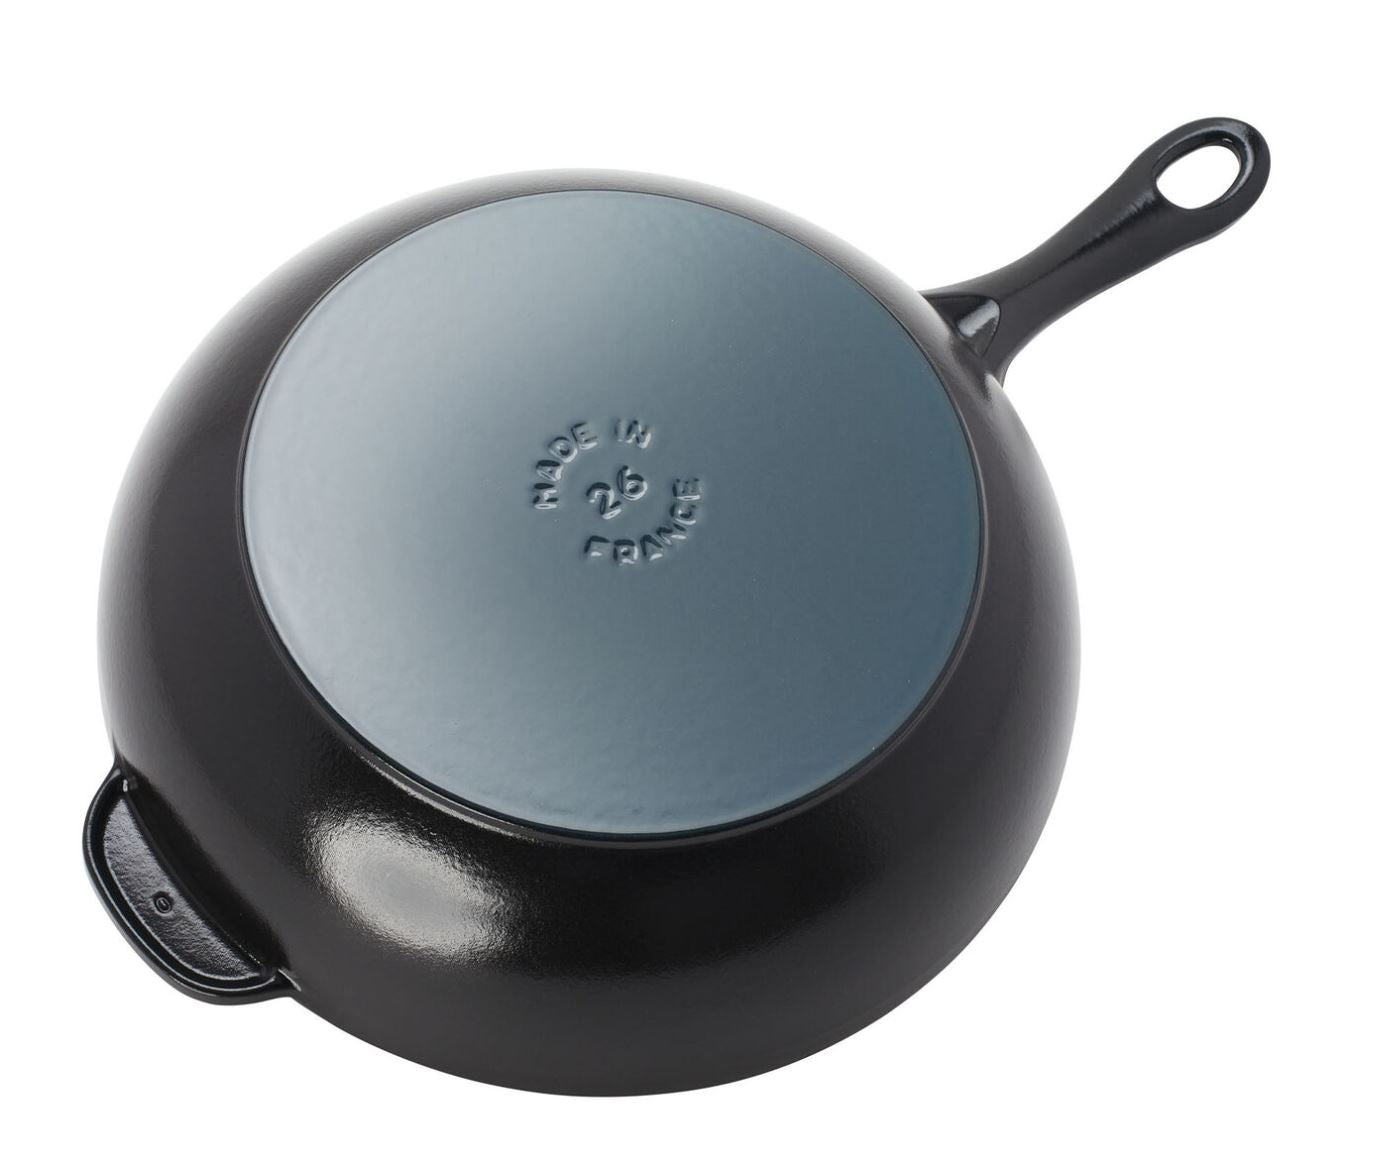 Cast Iron Daily Pan with Glass Lid